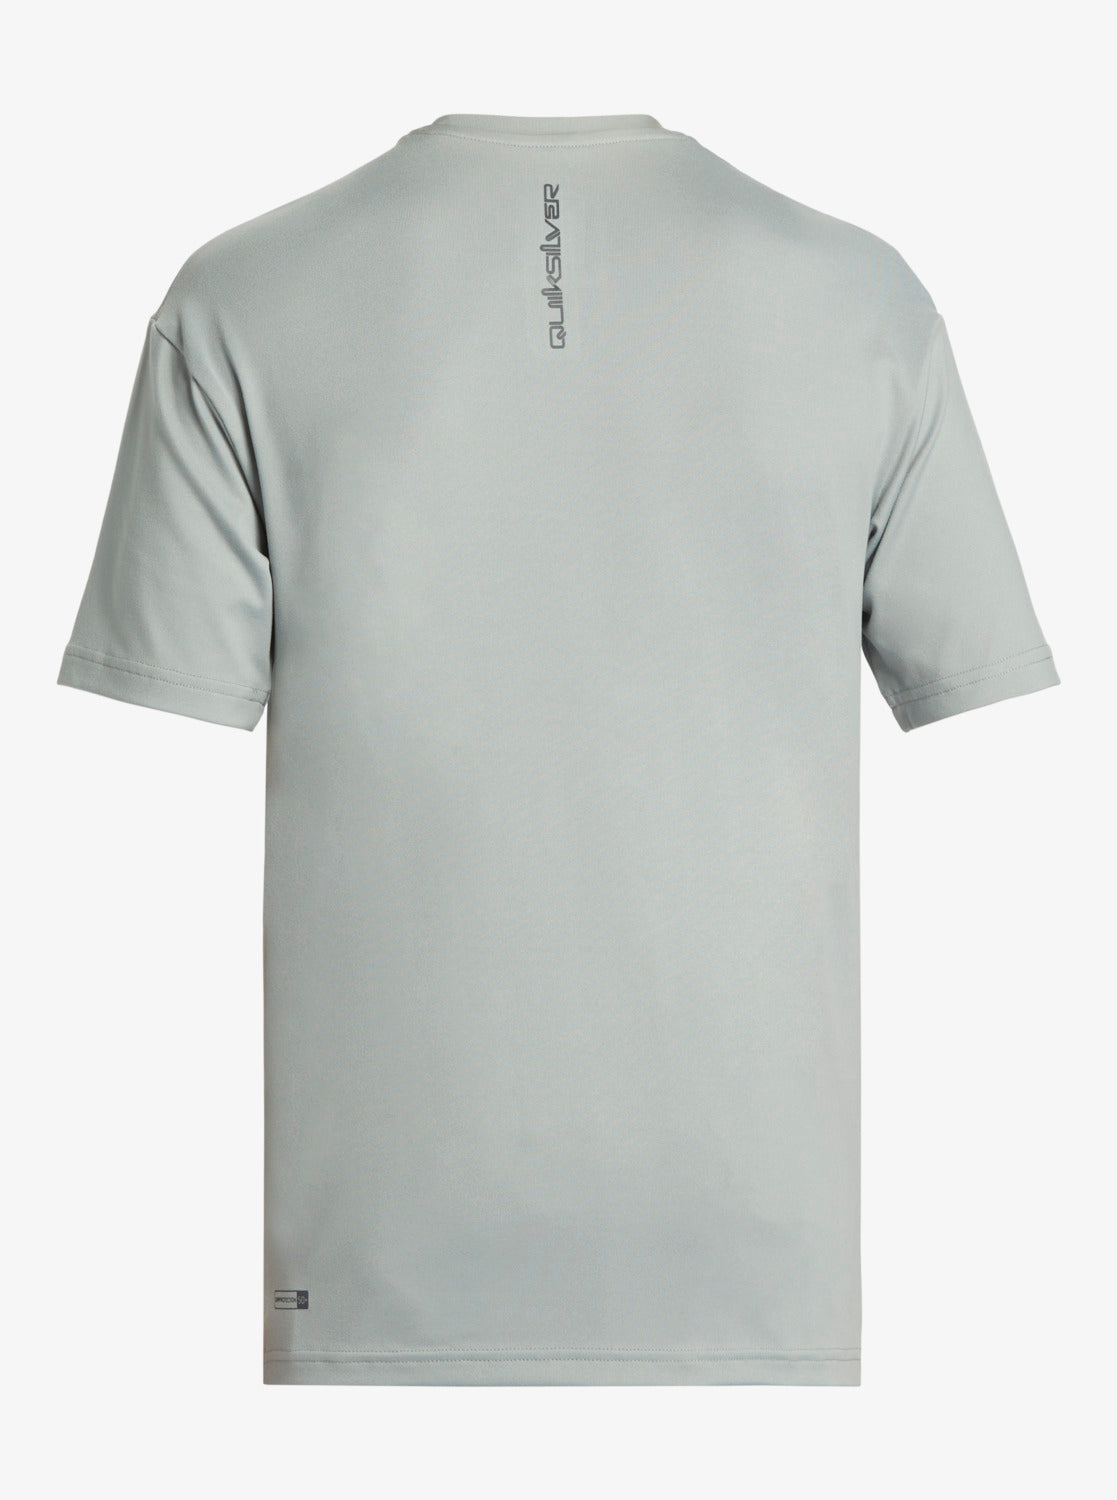 Quiksilver Everyday Surf Boys Short Sleeve UPF 50 Surf T-Shirt in Quarry